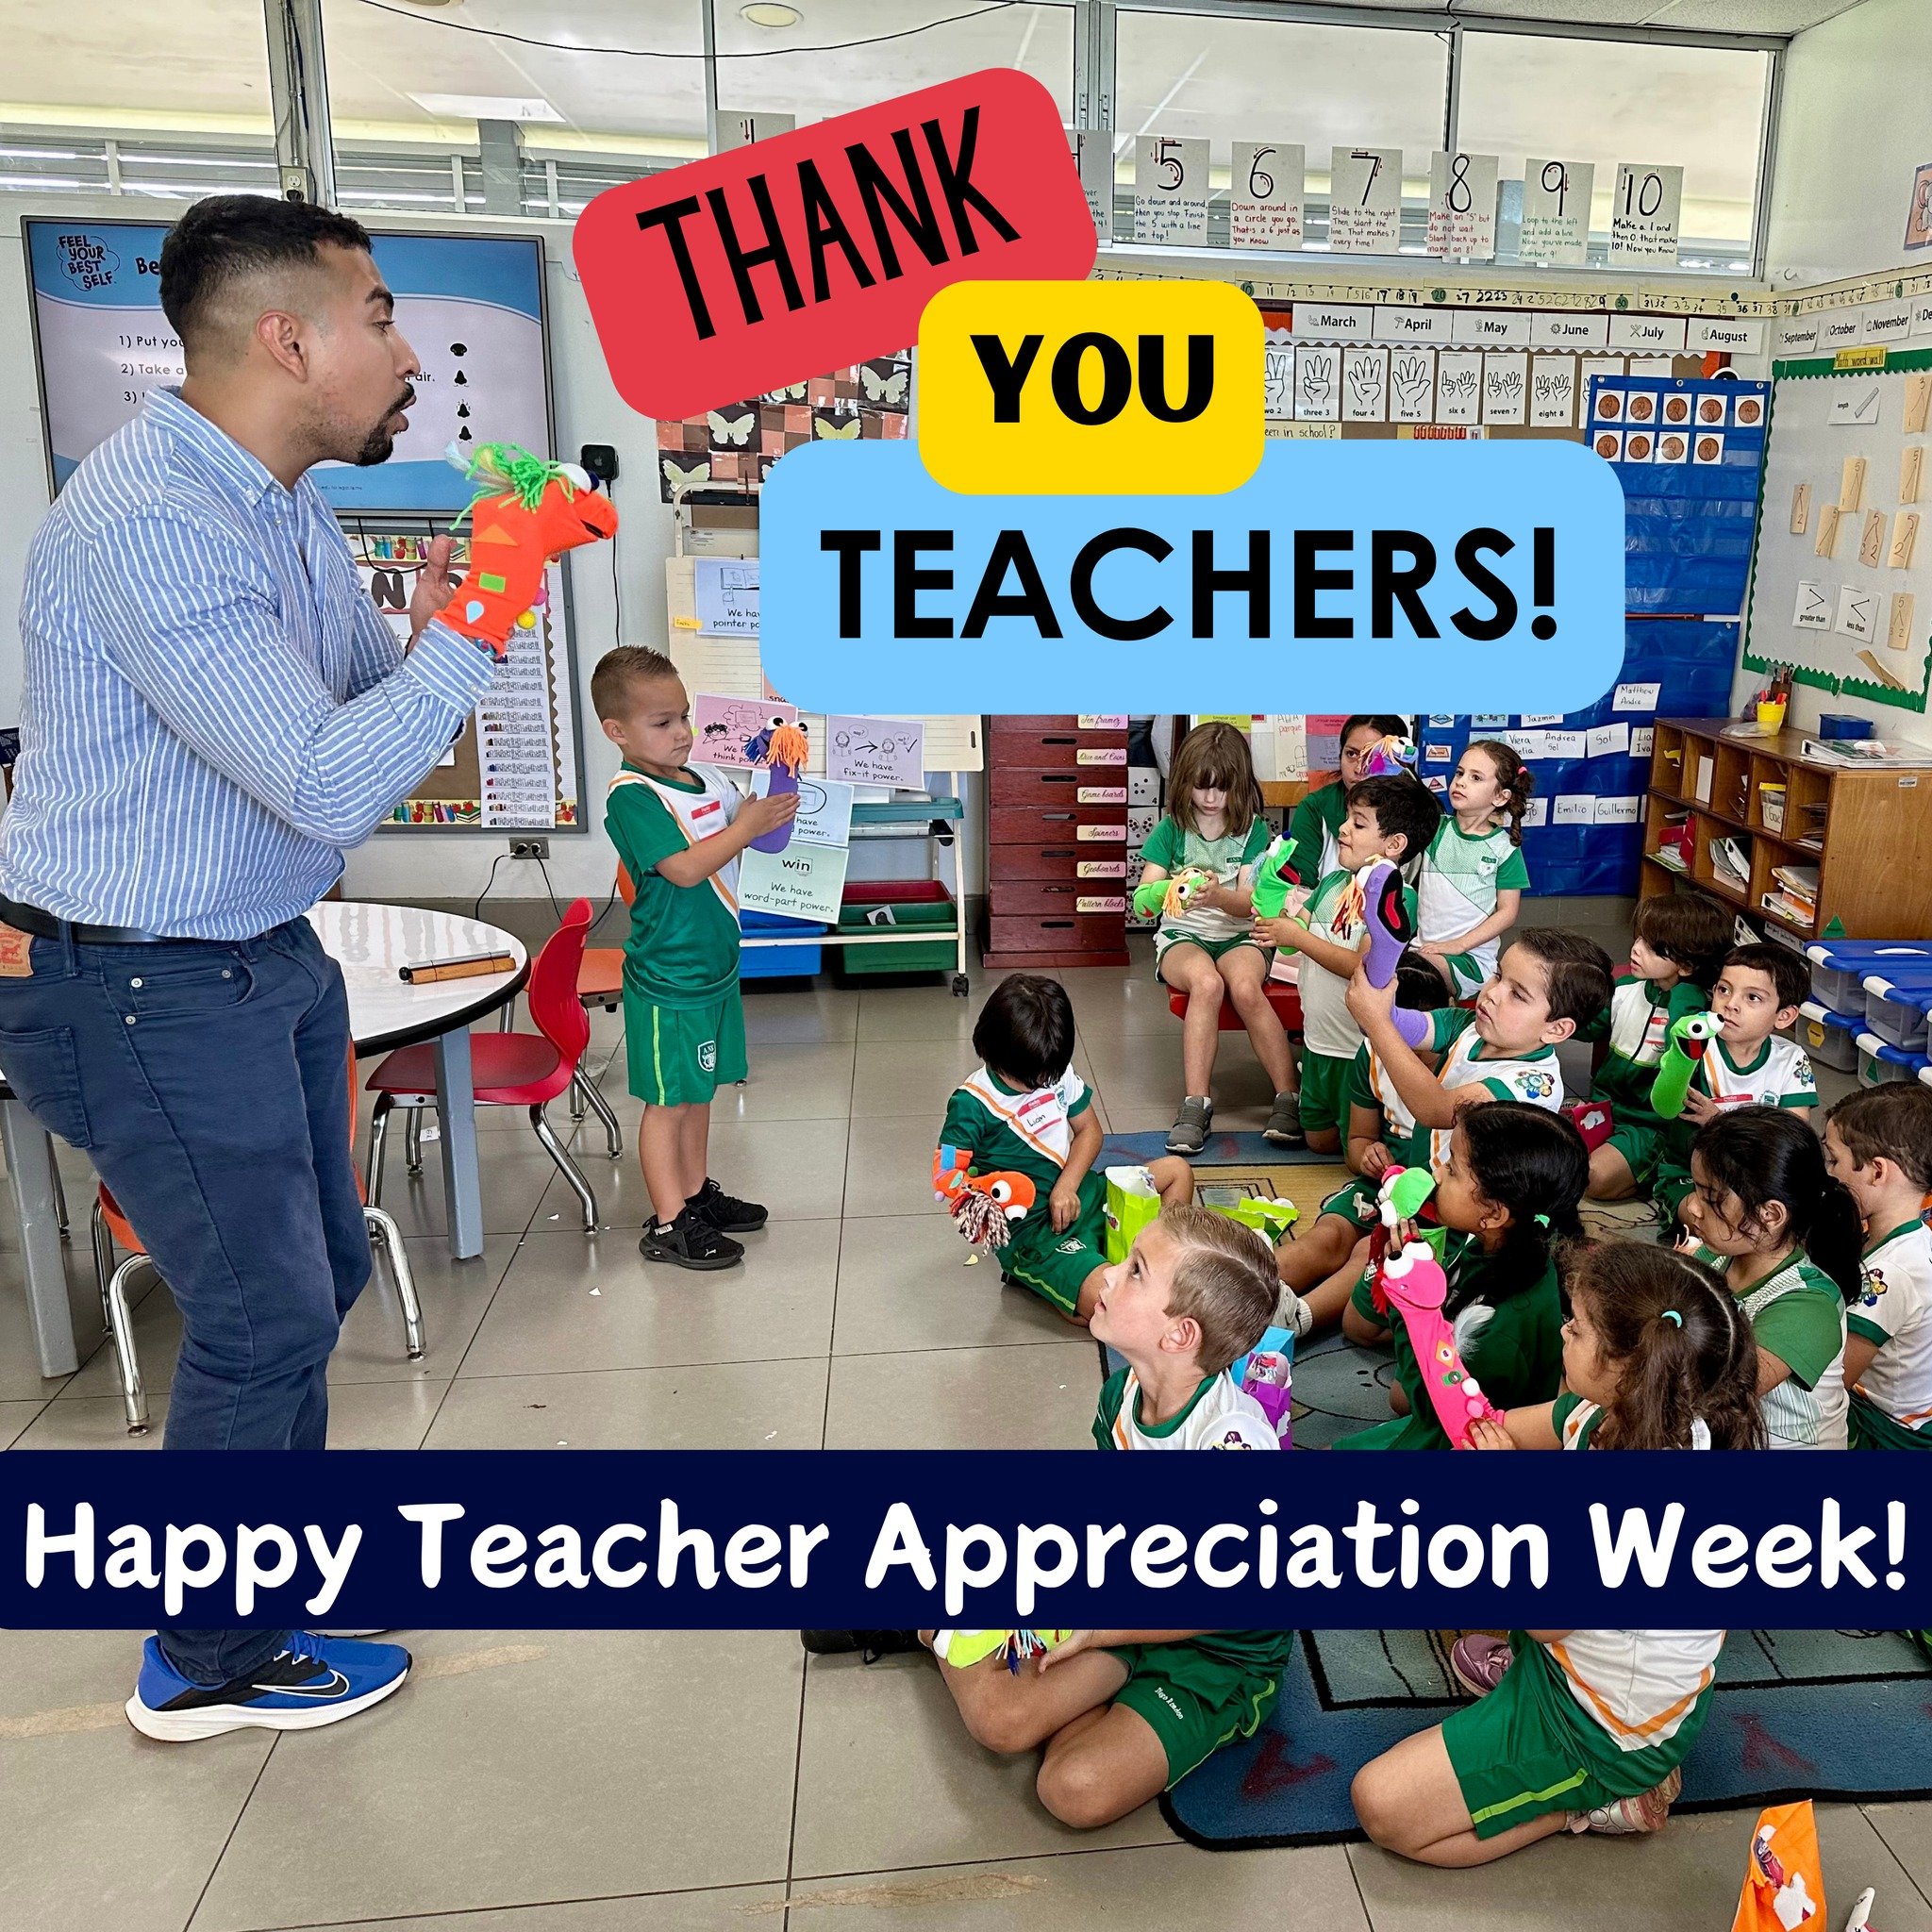 We're sending 3 Friendly Wishes to all the hardworking teachers this week! 🍎 Thank you teachers for all that you do! 🏫🫶#teacherappreciationweek